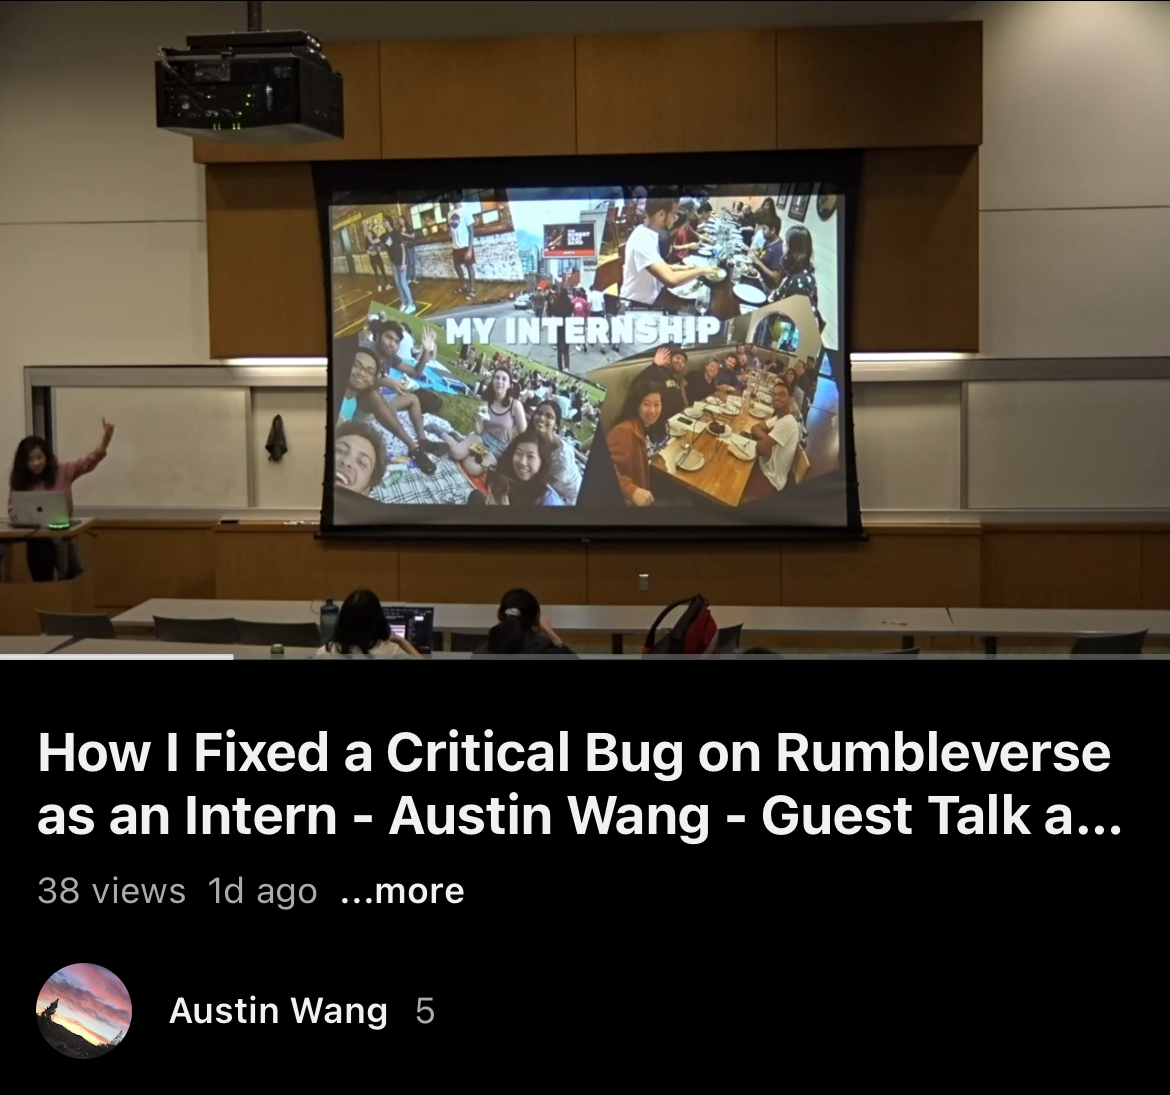 How I Fixed a Critical Bug on Rumbleverse as an Intern